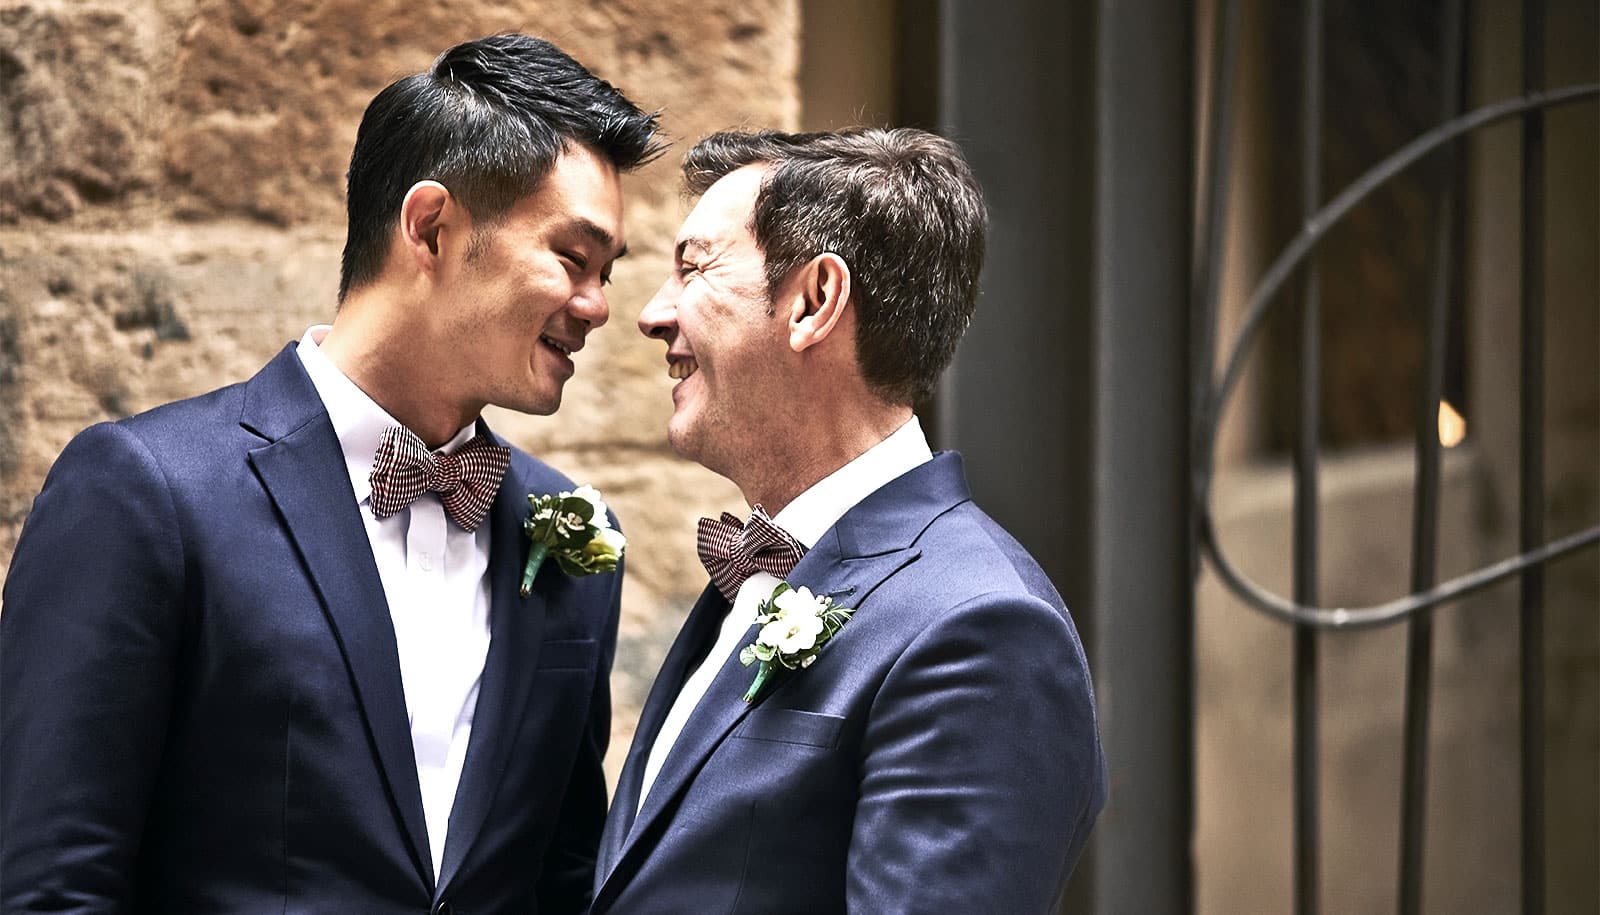 Us Same Sex Couples Get Marriage Licenses Without